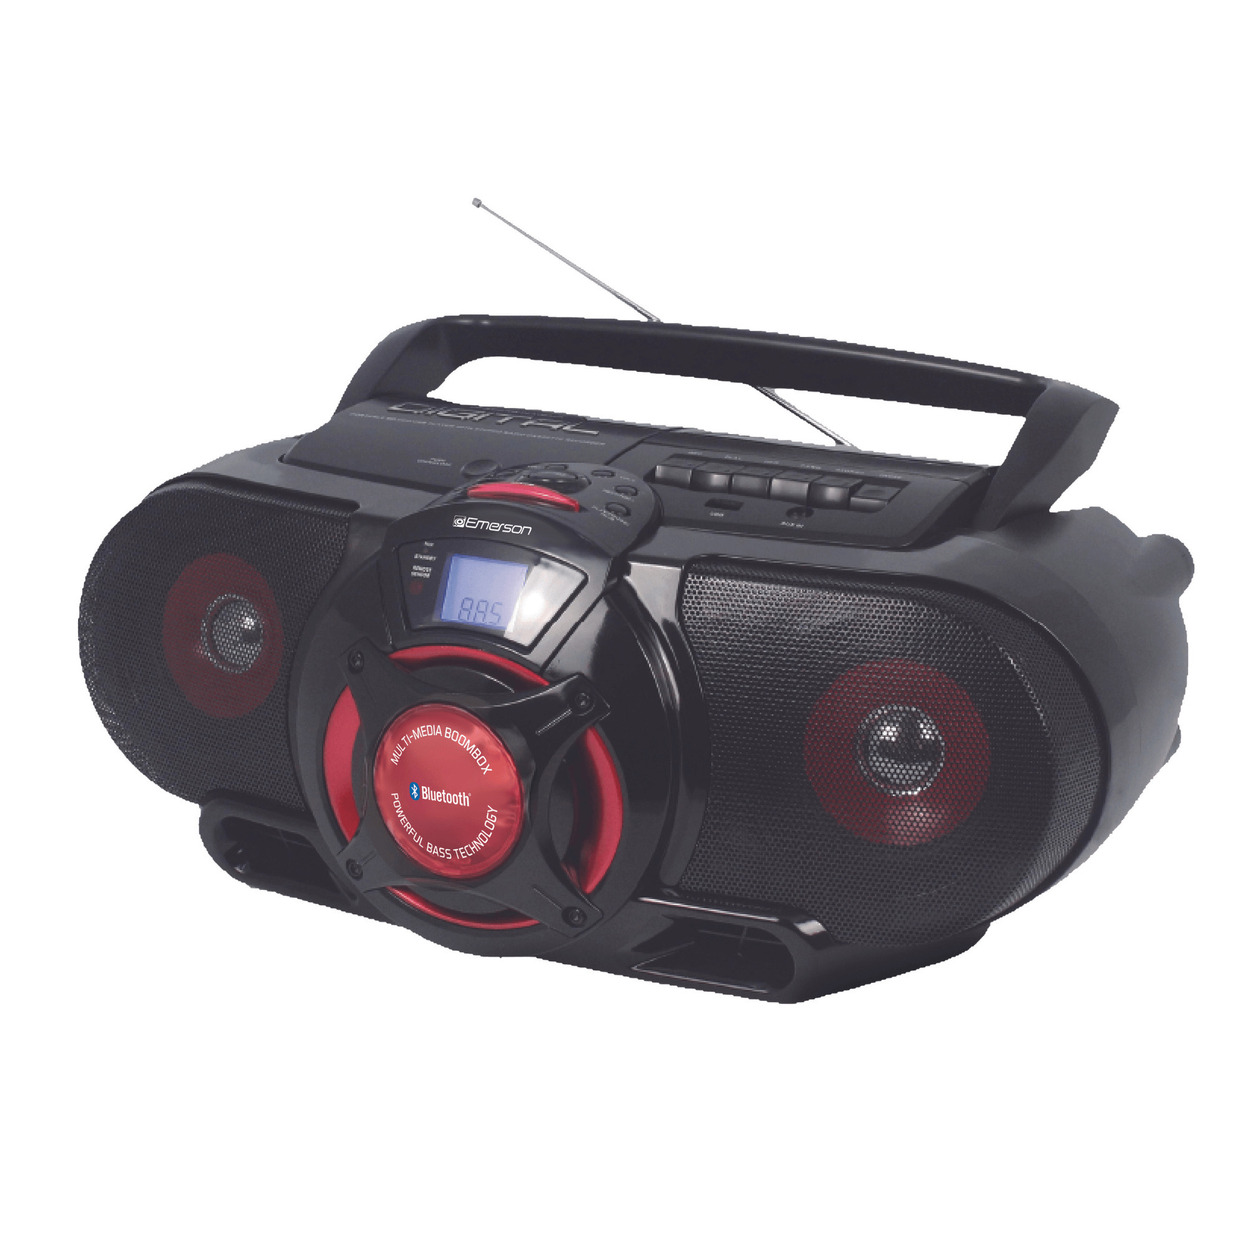 Emerson Portable Stereo Bluetooth Boombox